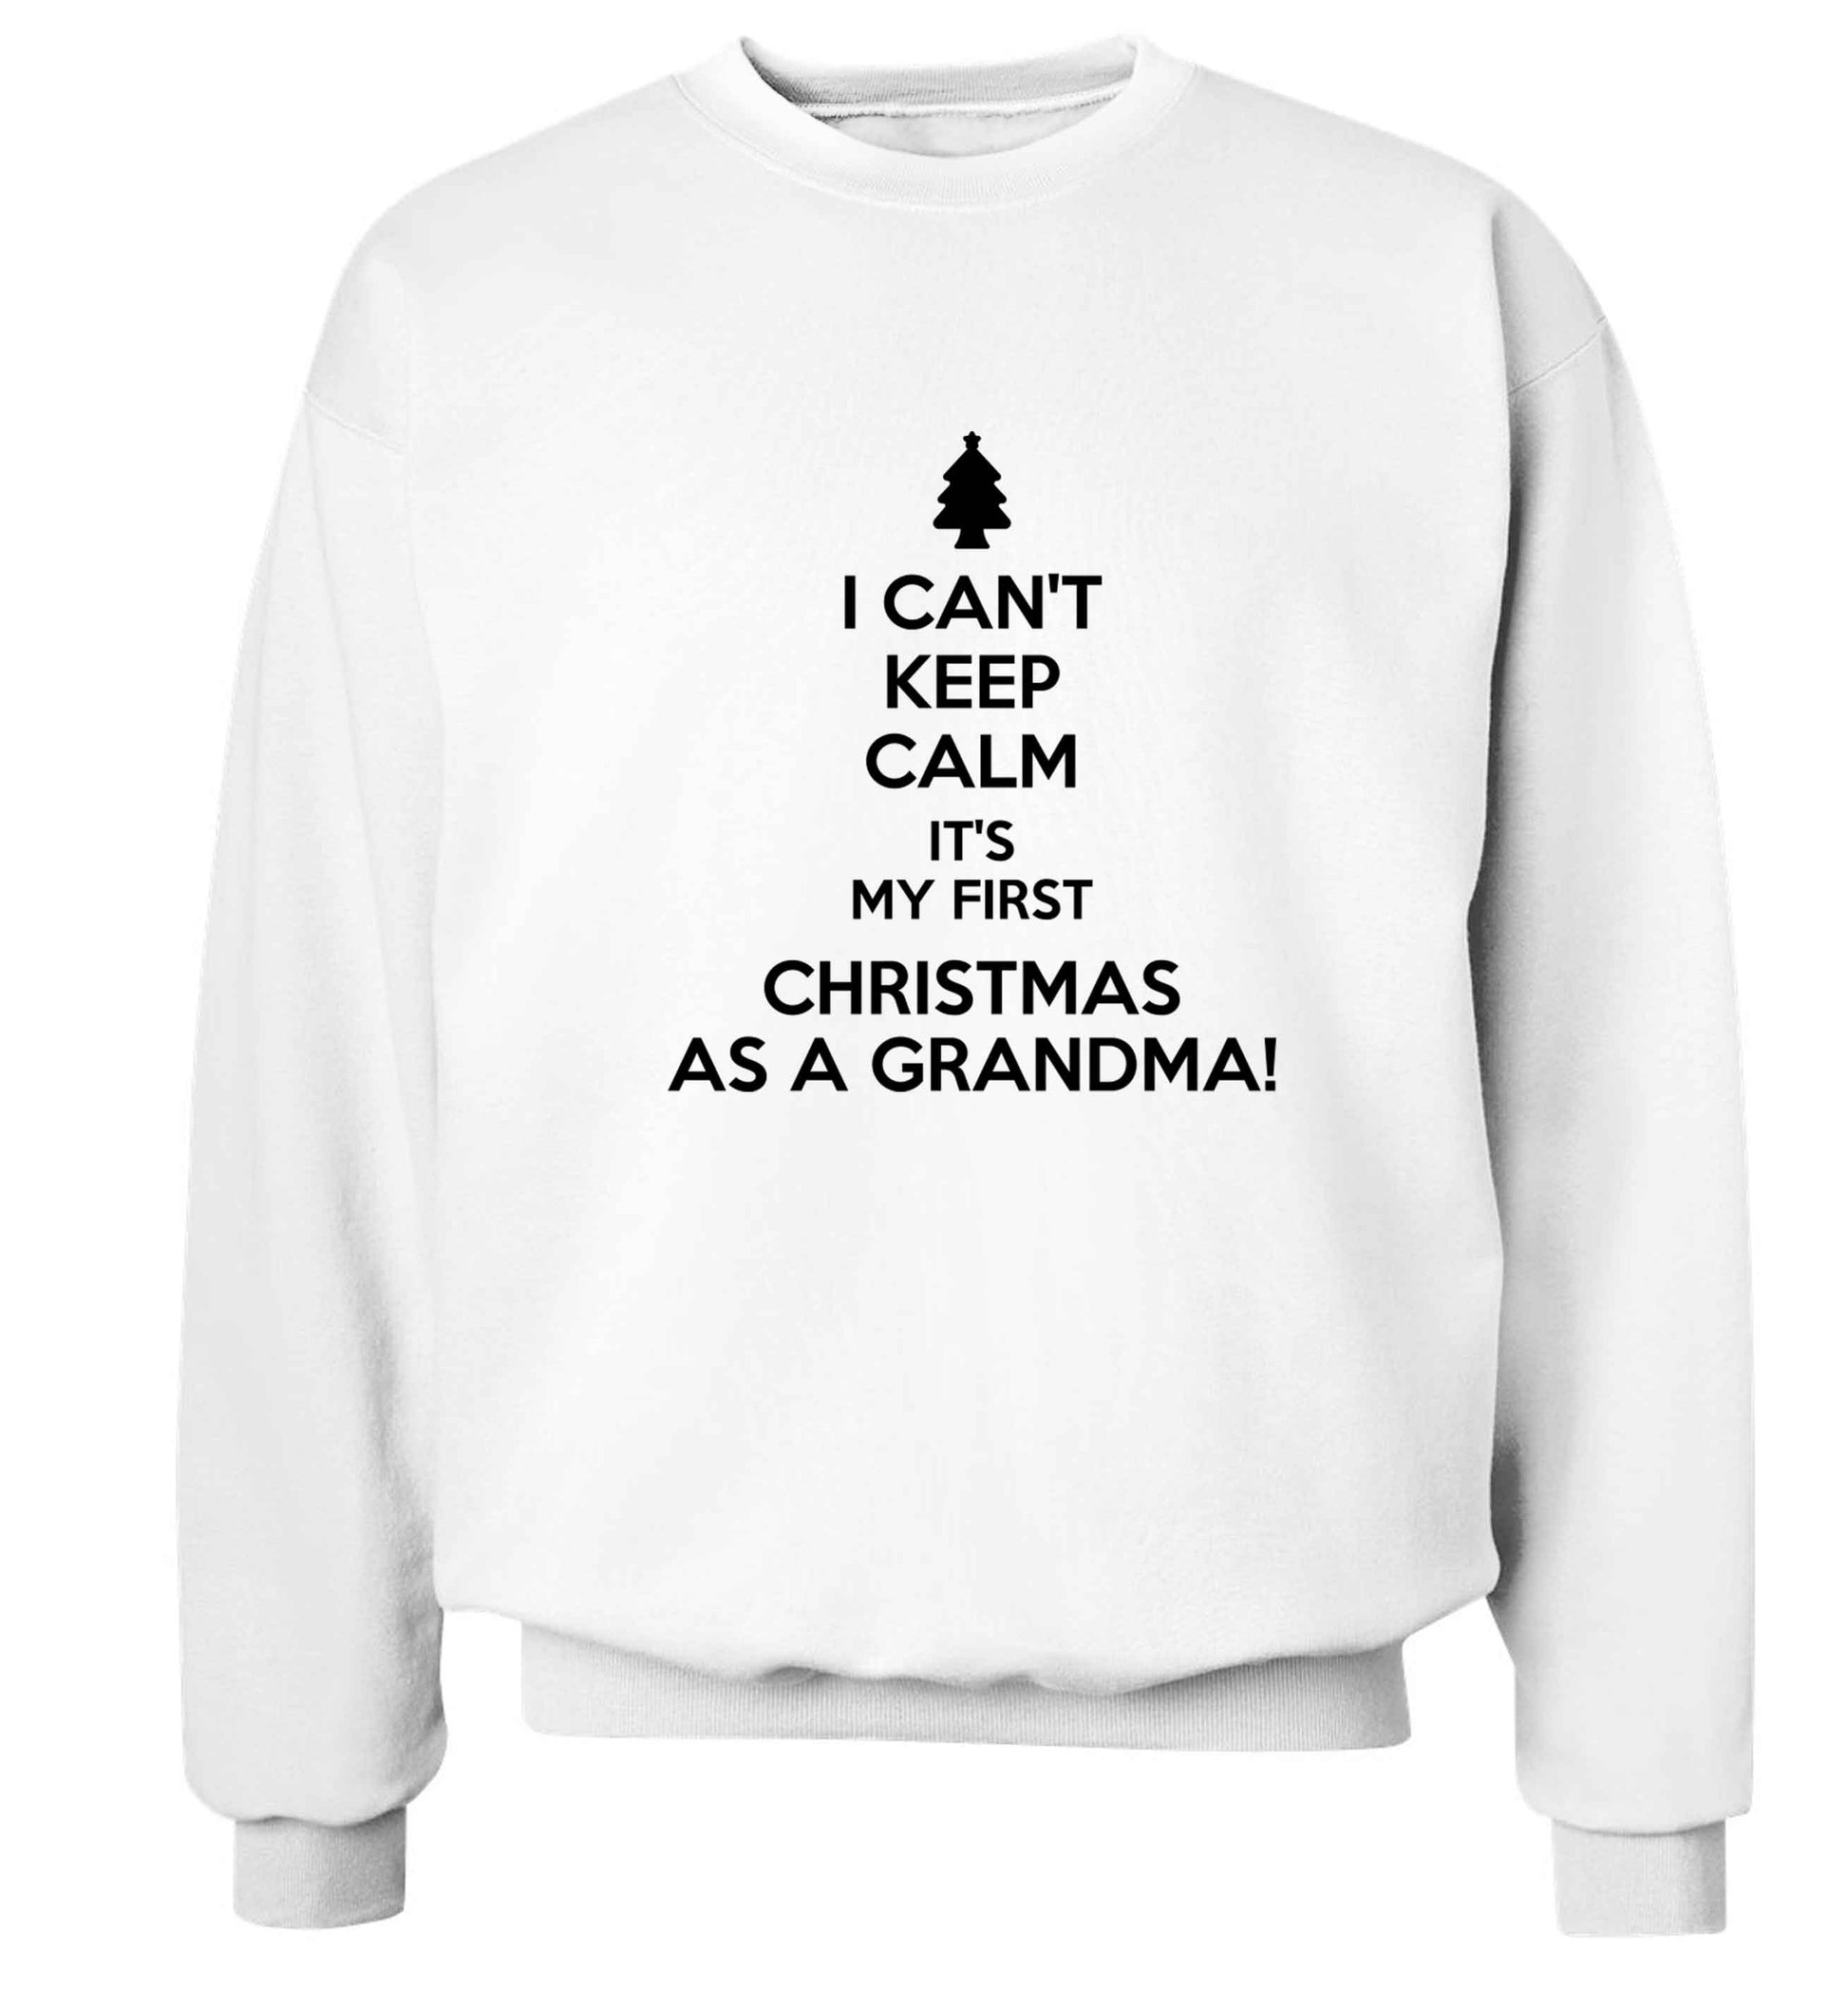 I can't keep calm it's my first Christmas as a grandma! Adult's unisex white Sweater 2XL